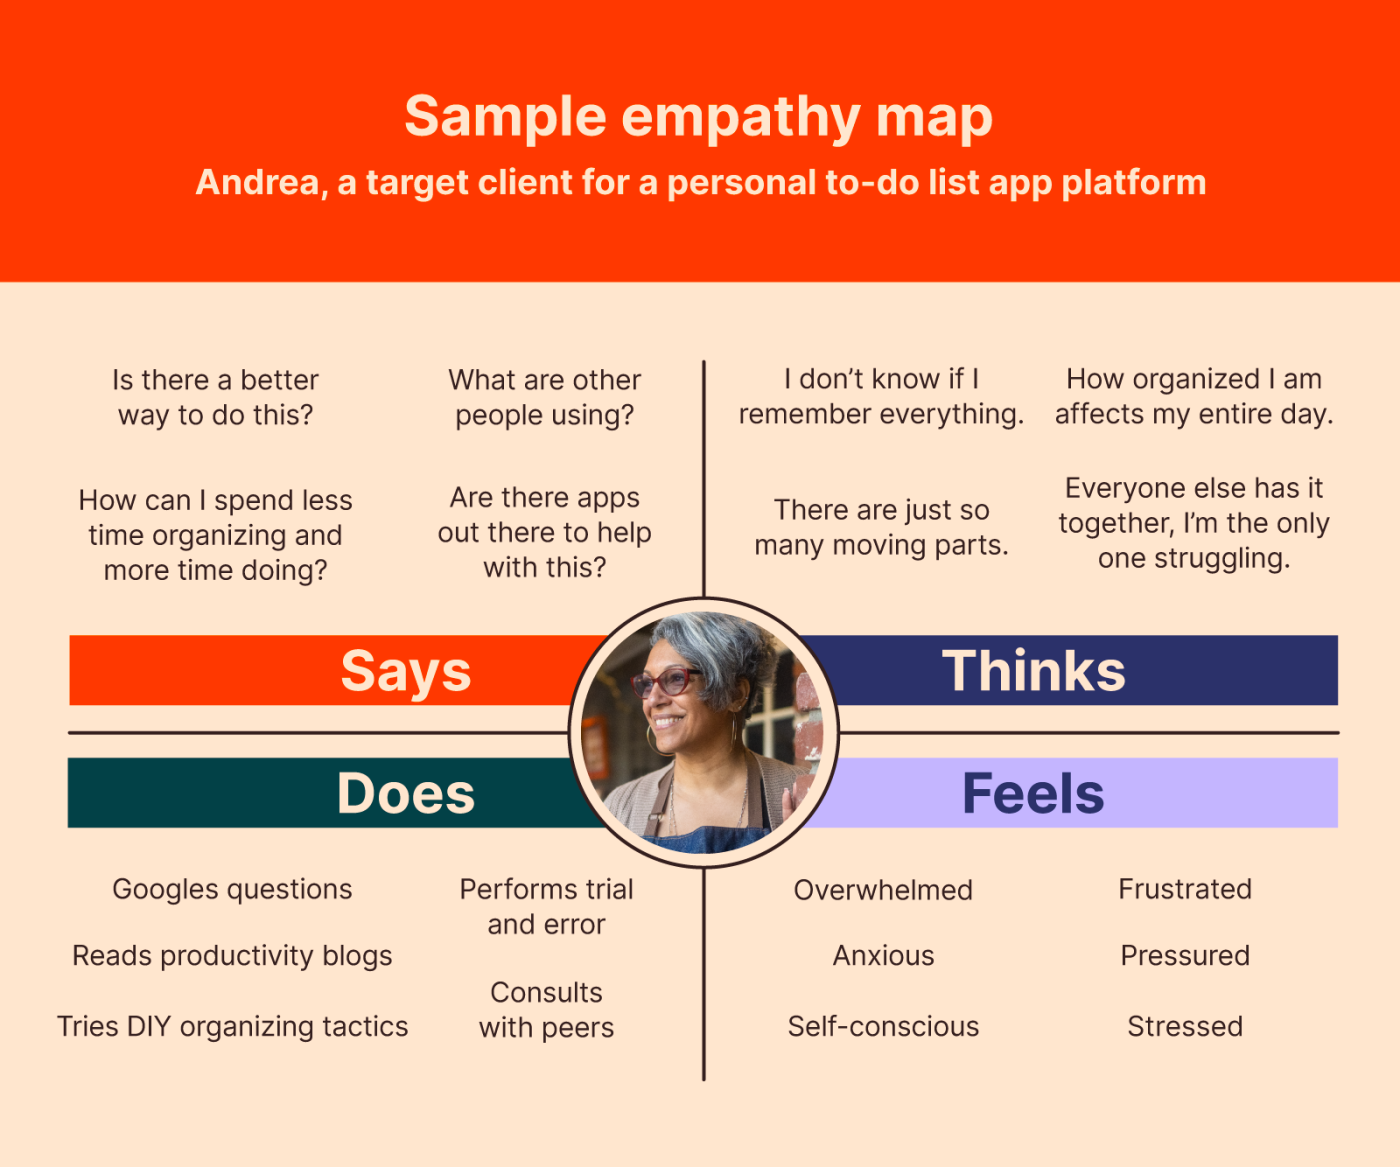 Empathy Is Great For Cx But It Doesn't Solve Customer Service Problems Alone